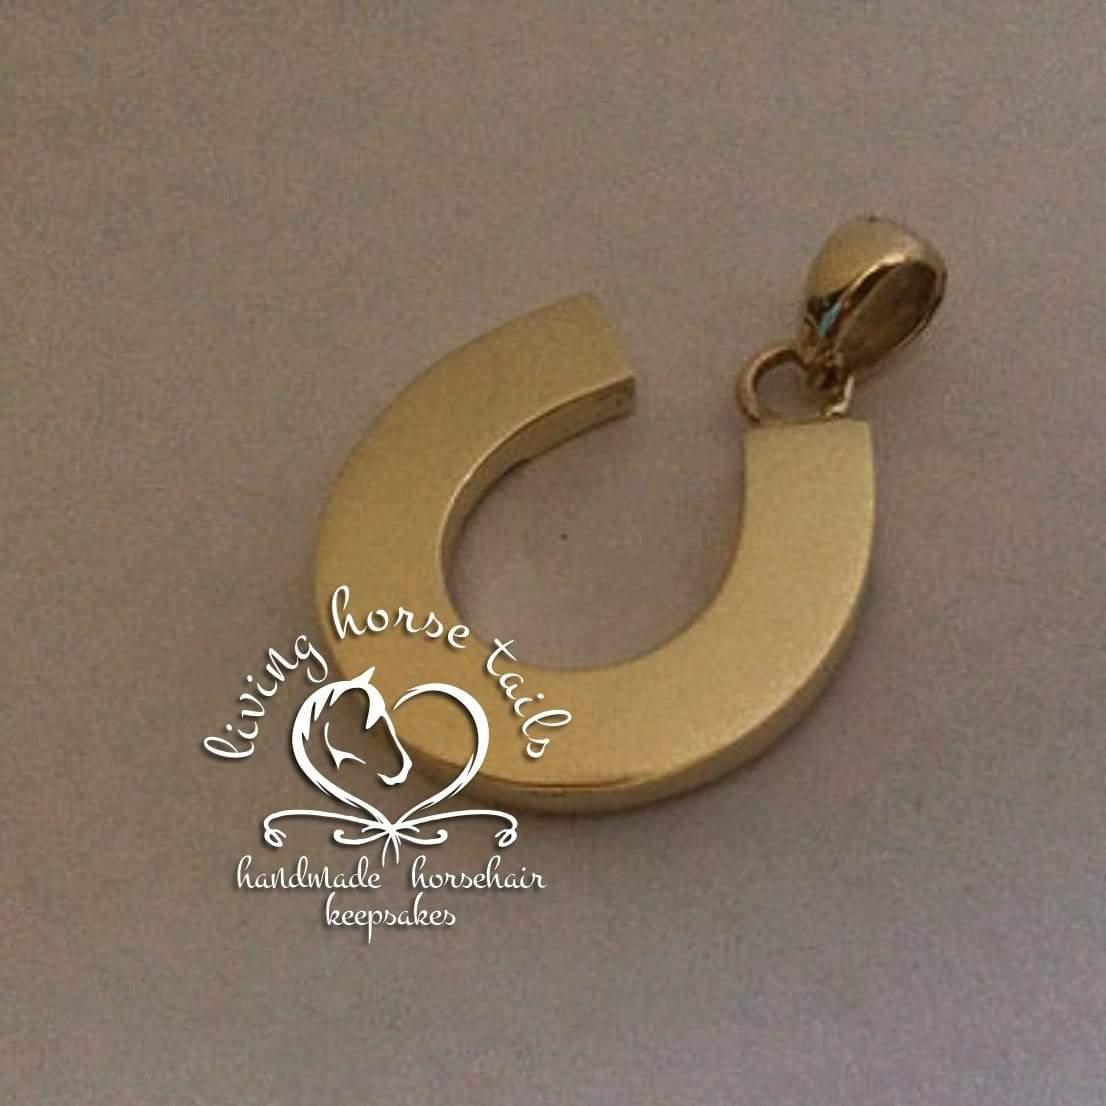 Load image into Gallery viewer, Living Horse Tails Gold Horseshoe Pendant inlaid with Horse Hair Braid (solid Yellow or Rose) Custom jewellery Monika Australia horsehair keepsake
